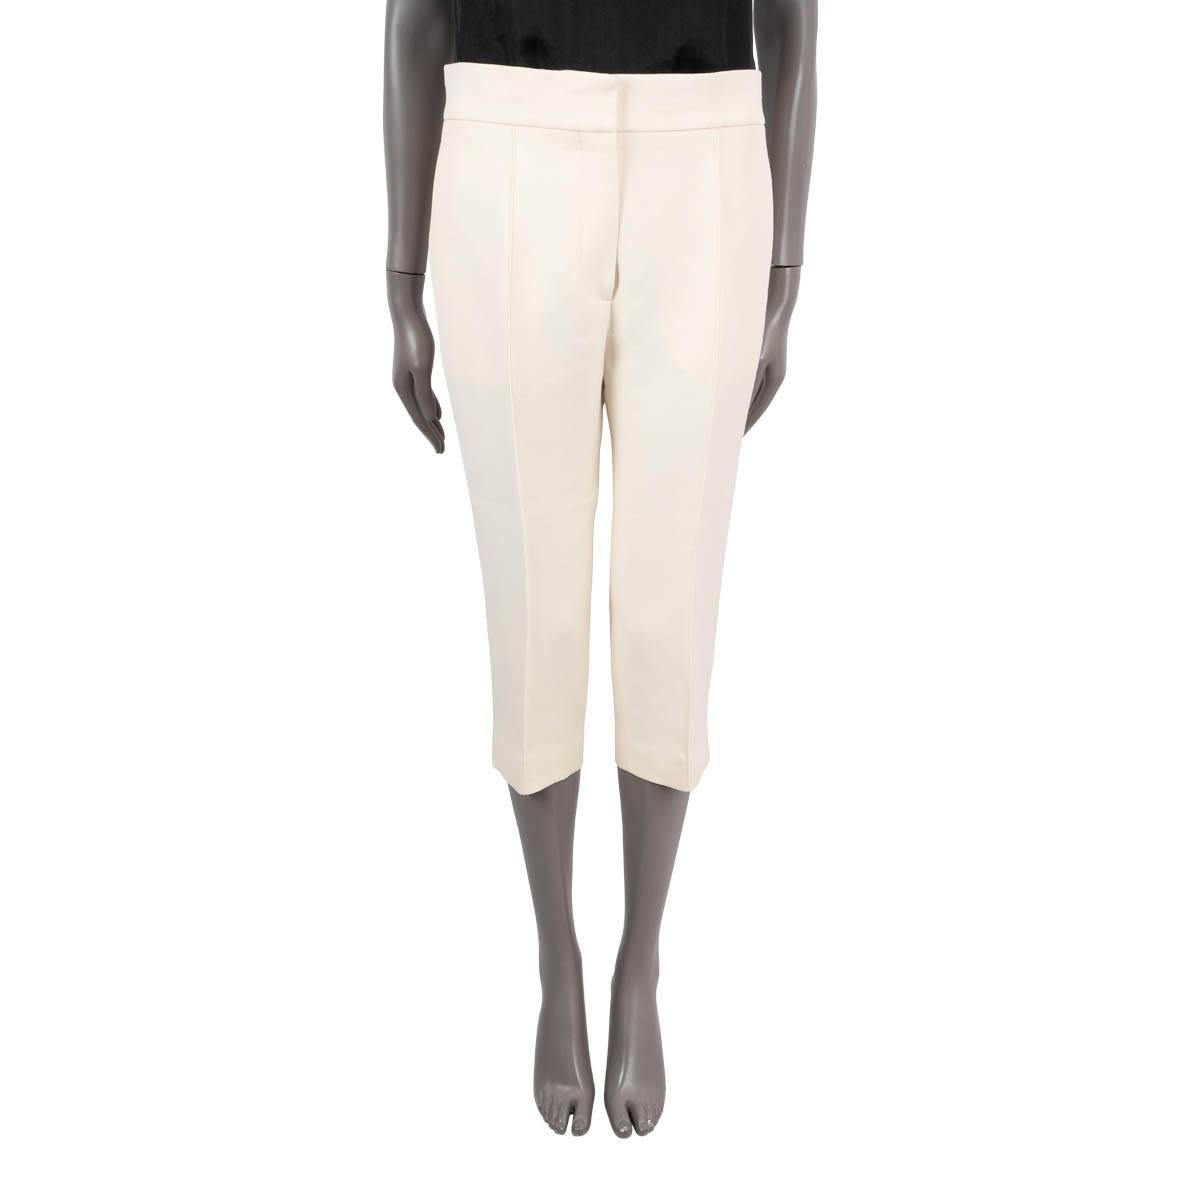 100% authentic Christian Dior 30 Montaigne capri pants in ivory wool (77%) and silk (23%). Feature straight cut legs and two slit pockets. Closes with concealed button, hook and zipper. Have been worn and are in excellent condition. 

2020